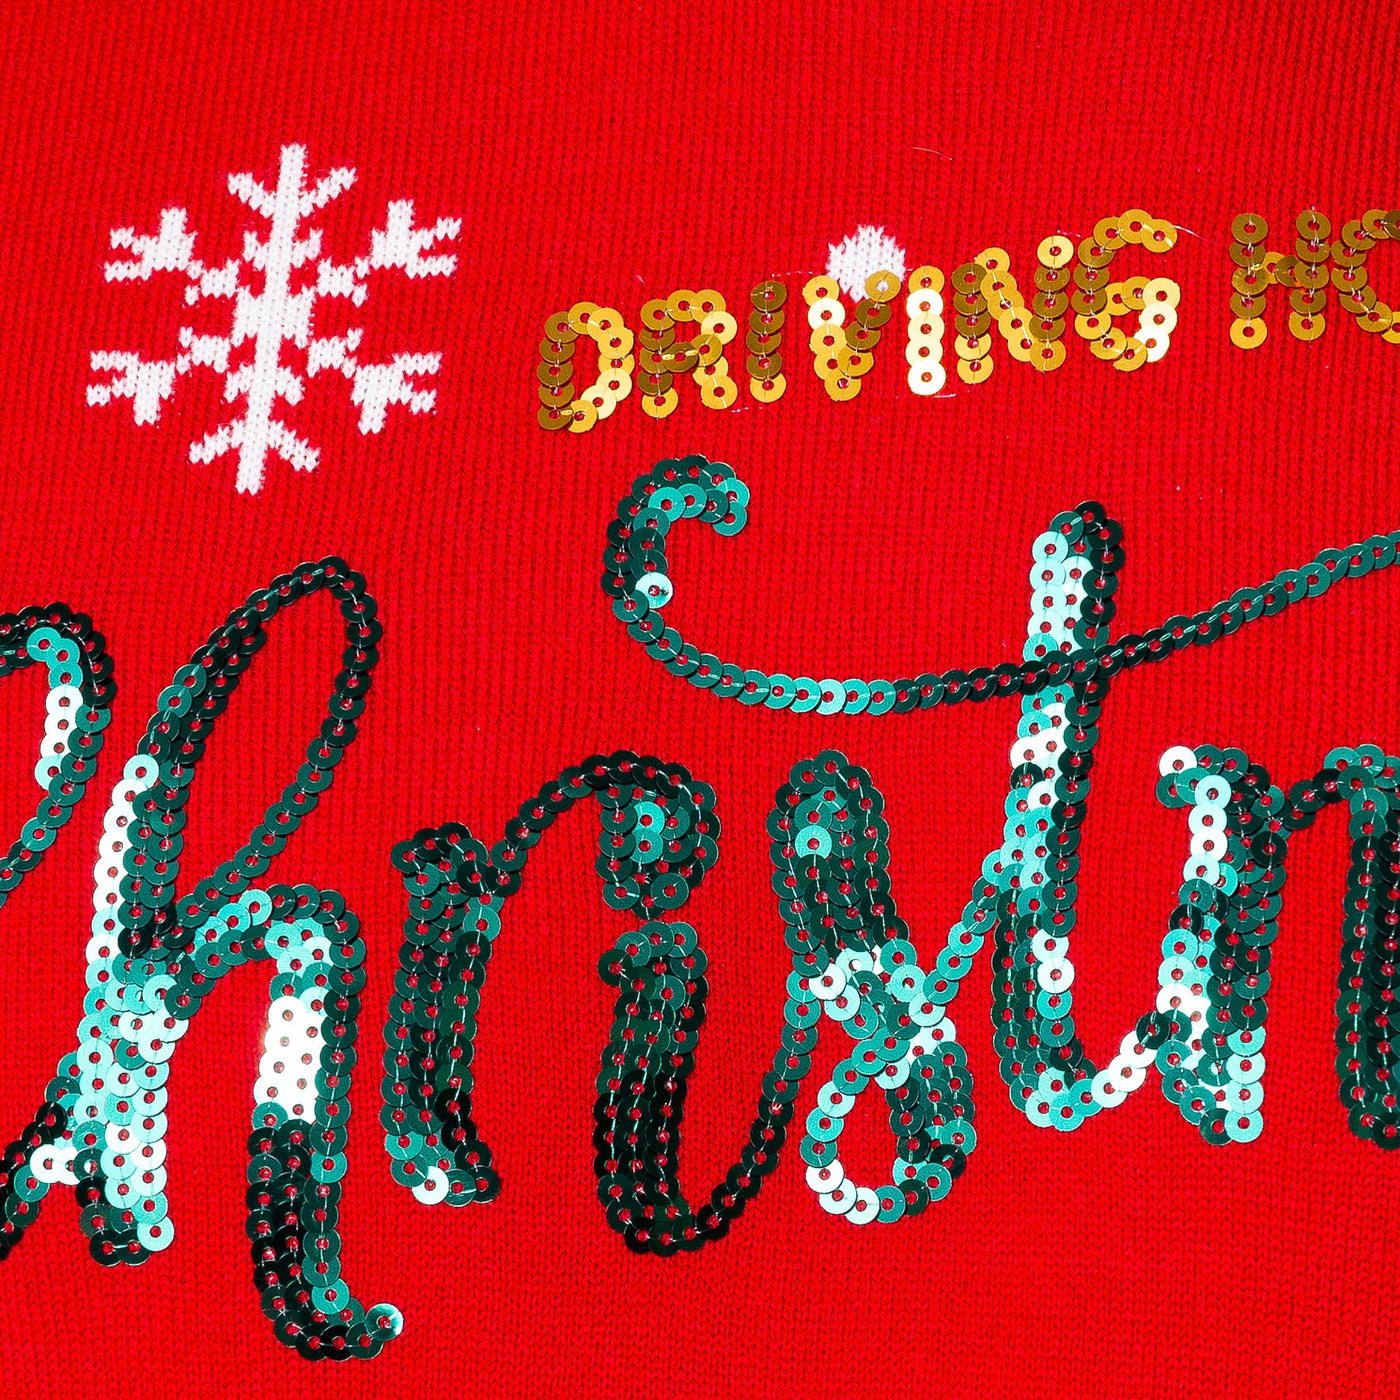 Driving Home For Christmas Julesweater Dame